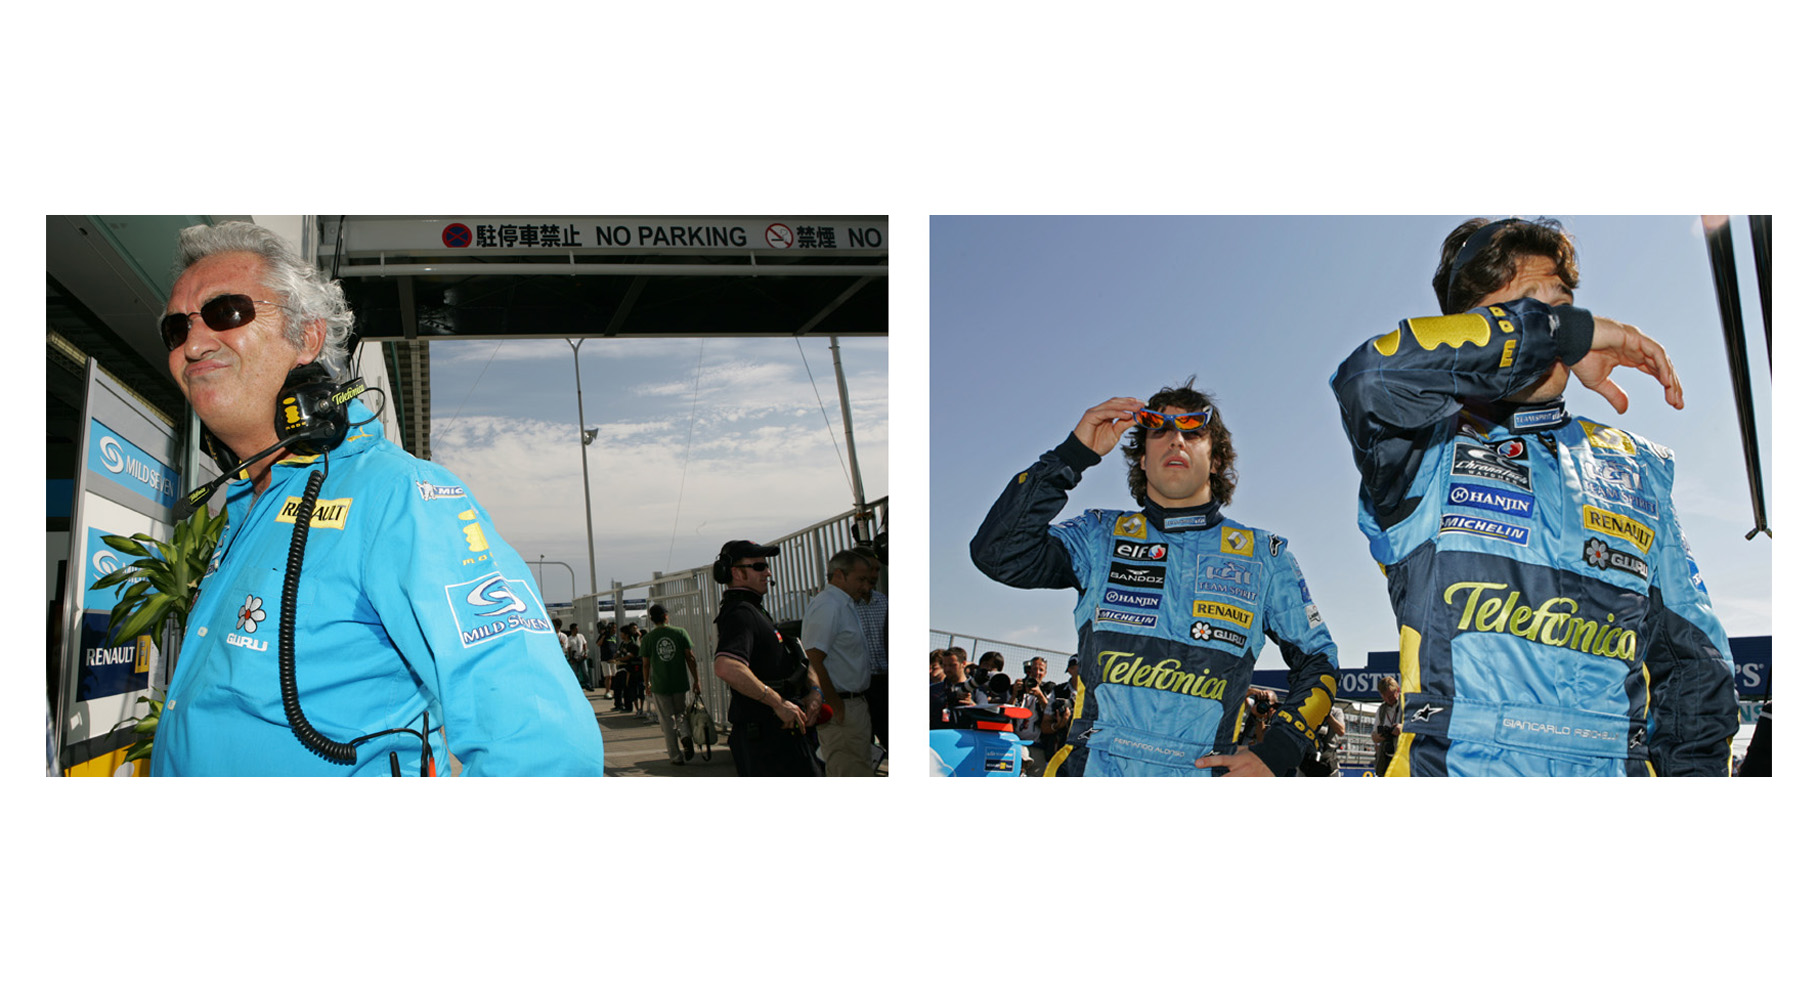 Team boss of Renault F1 Flavio Briatore and right Renault Drivers Fernando Alonso and Giancarlo Fisichella